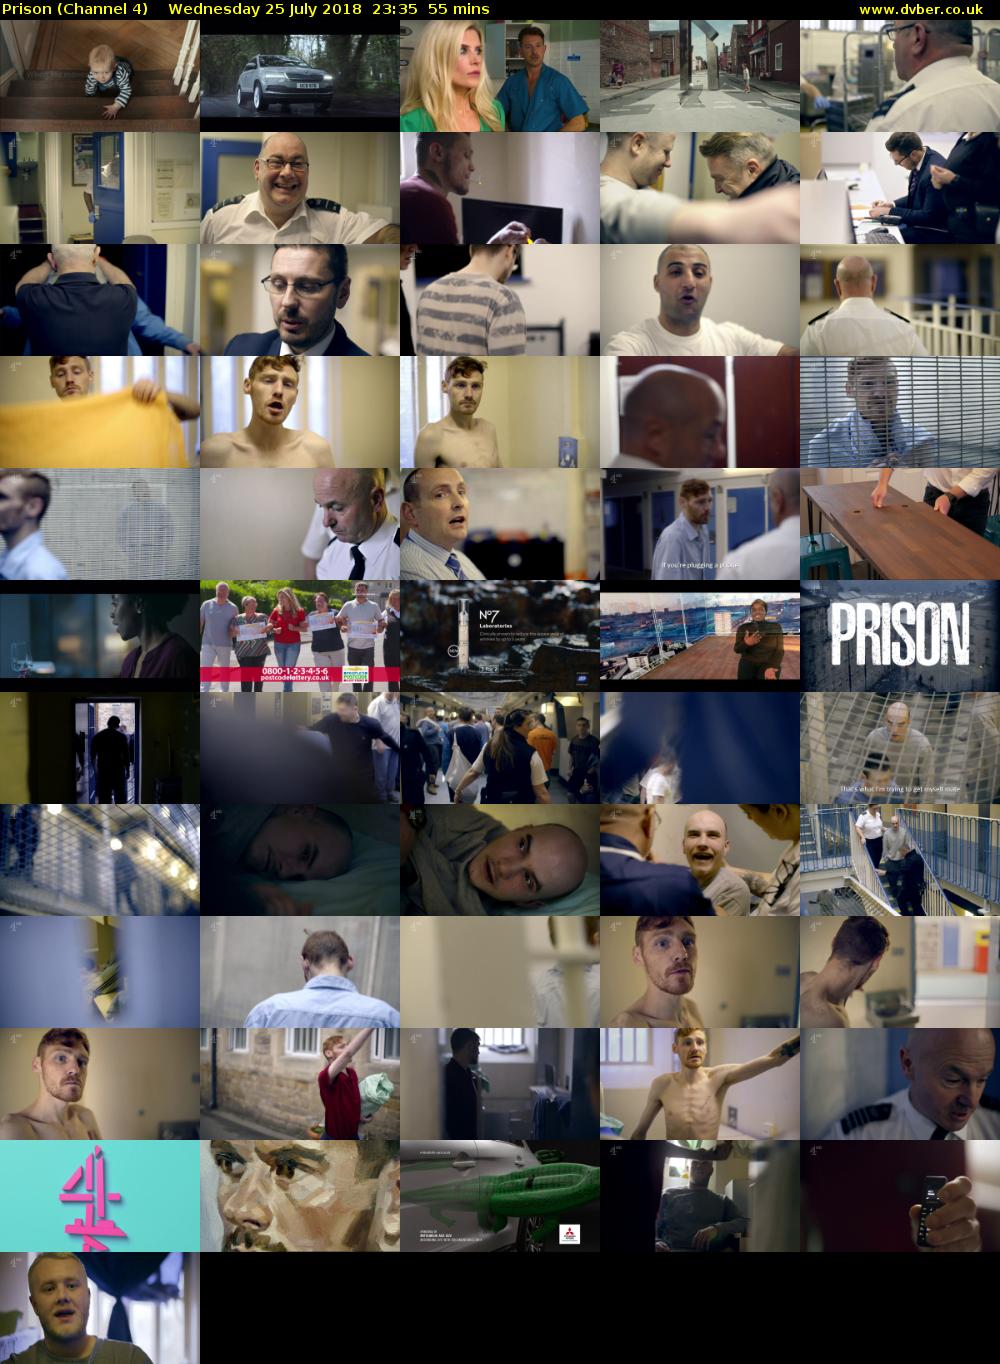 Prison (Channel 4) Wednesday 25 July 2018 23:35 - 00:30